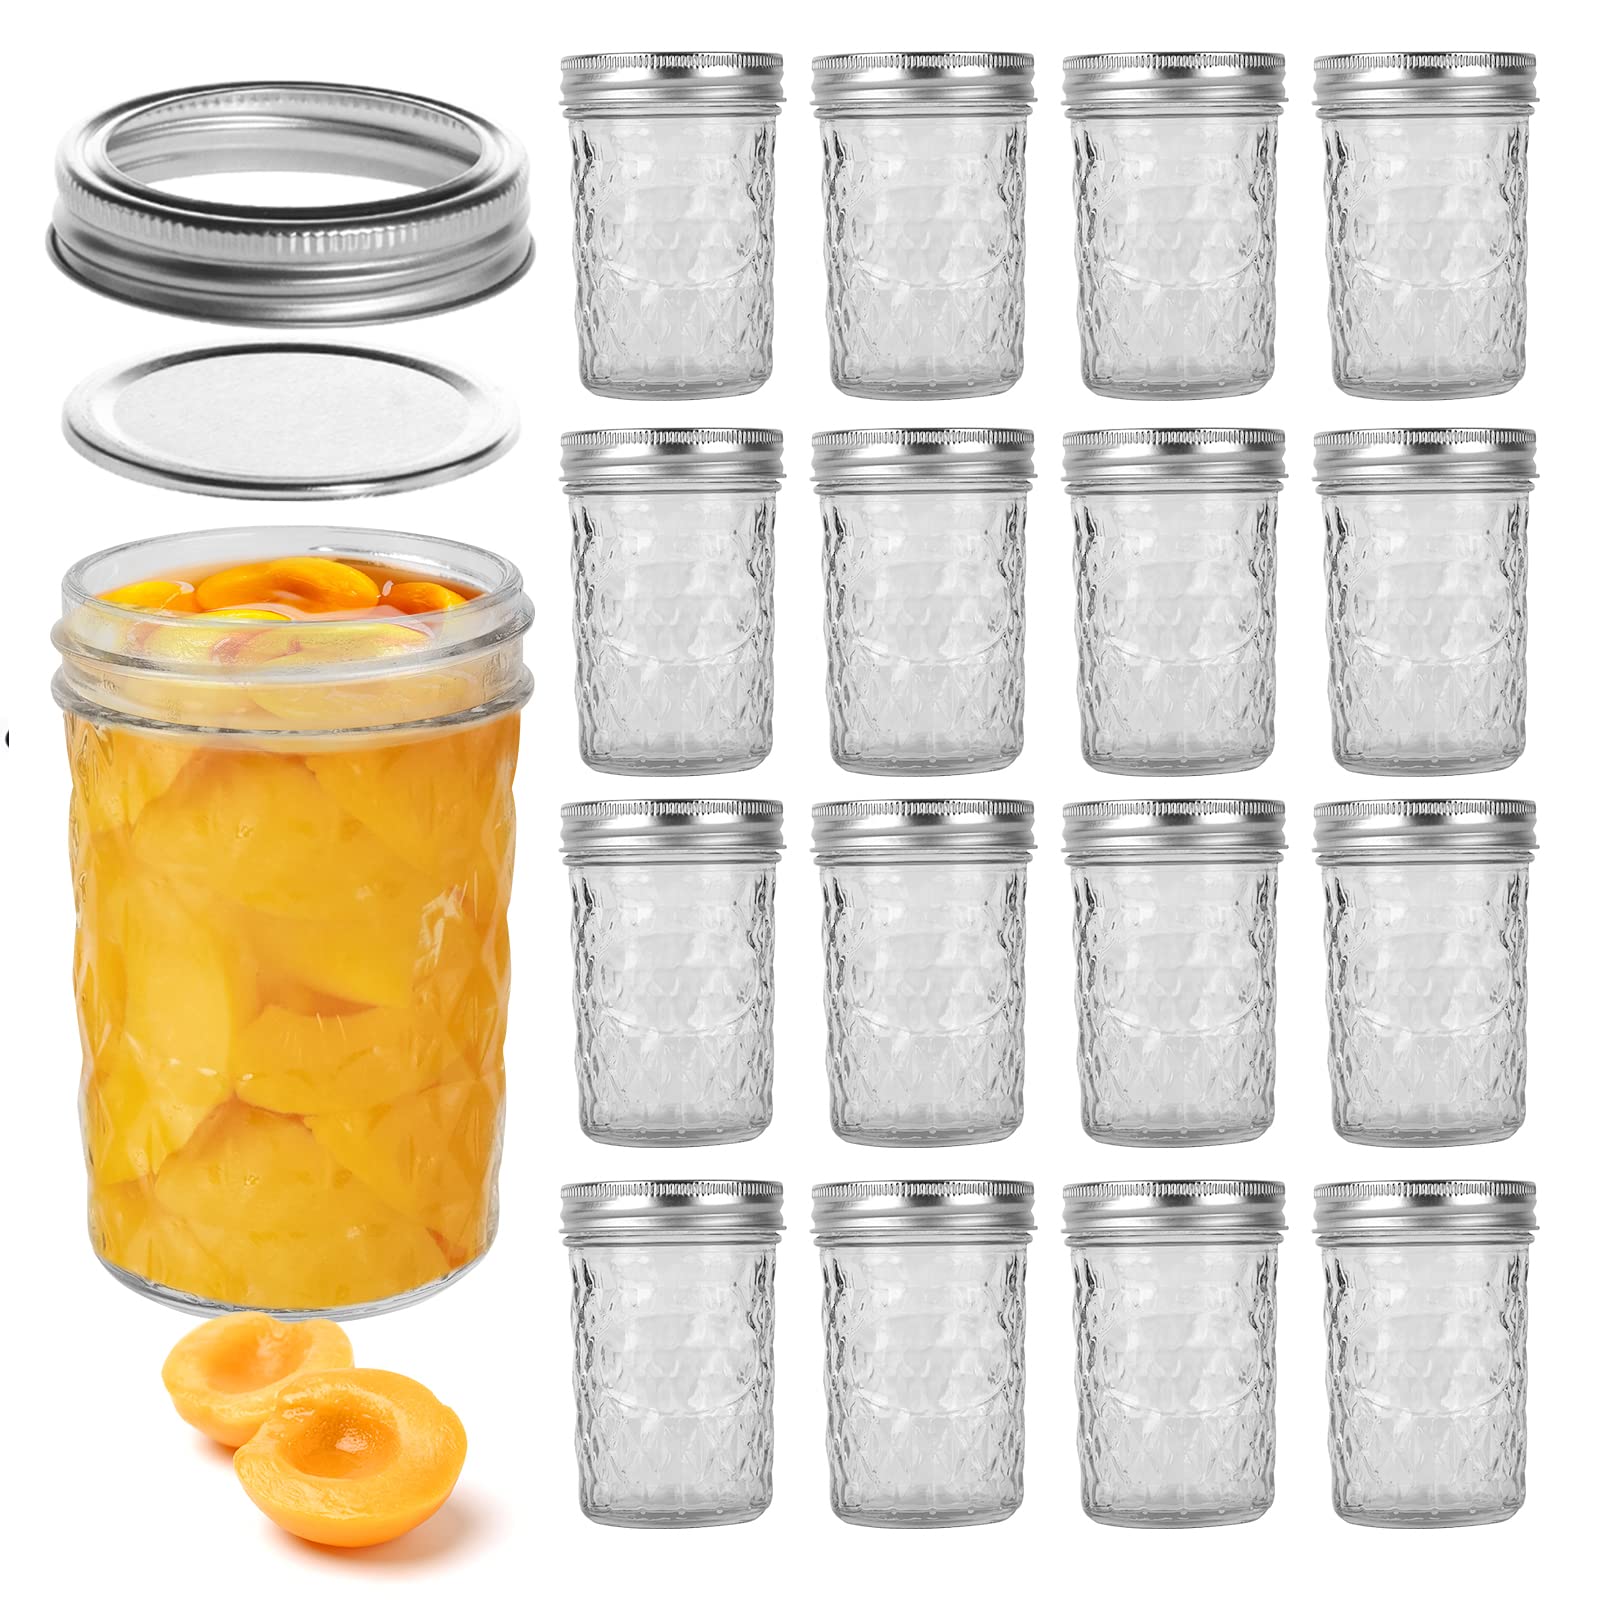 LEQEE Mason Jars 8 oz 16 PACK Mini Canning Jars with Silver Lids and Bands Regular Mouth Jelly Jar for Jam, Honey, Wedding Favors, Shower Favors, B...